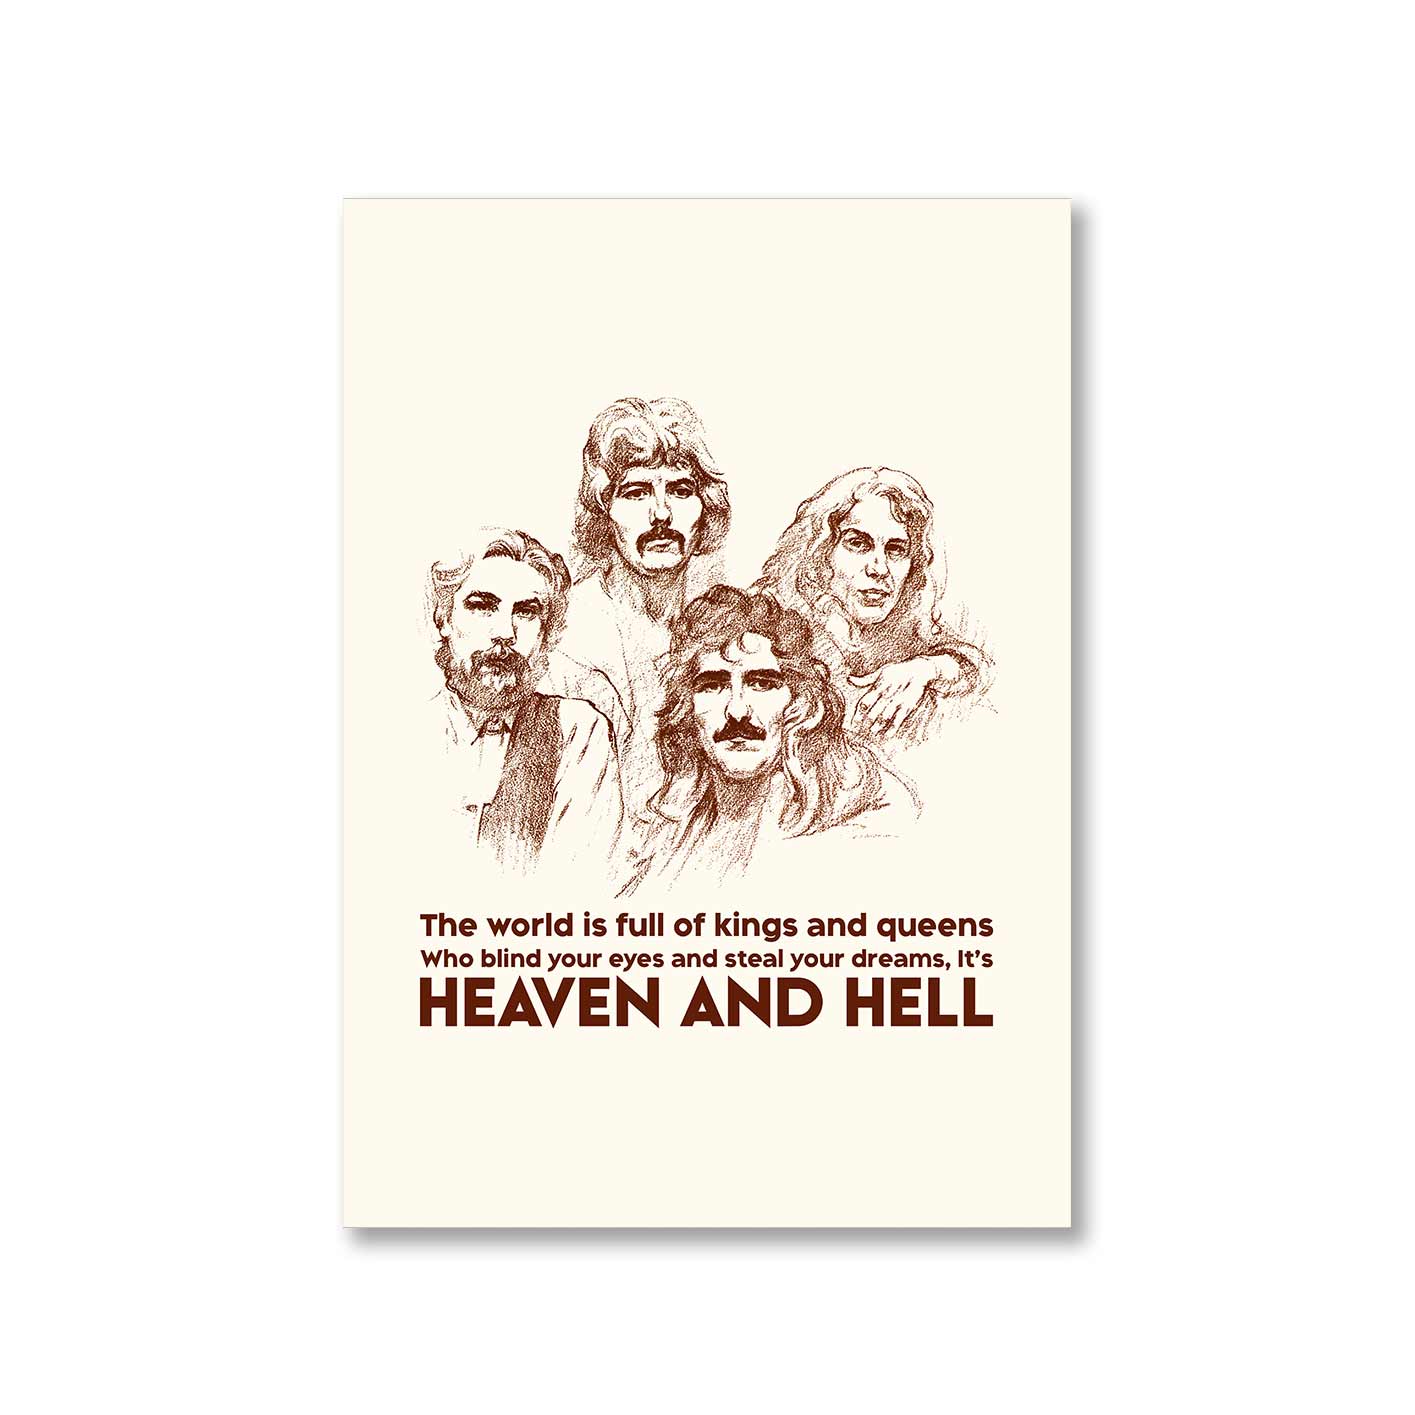 black sabbath it's heaven and hell poster wall art buy online india the banyan tee tbt a4